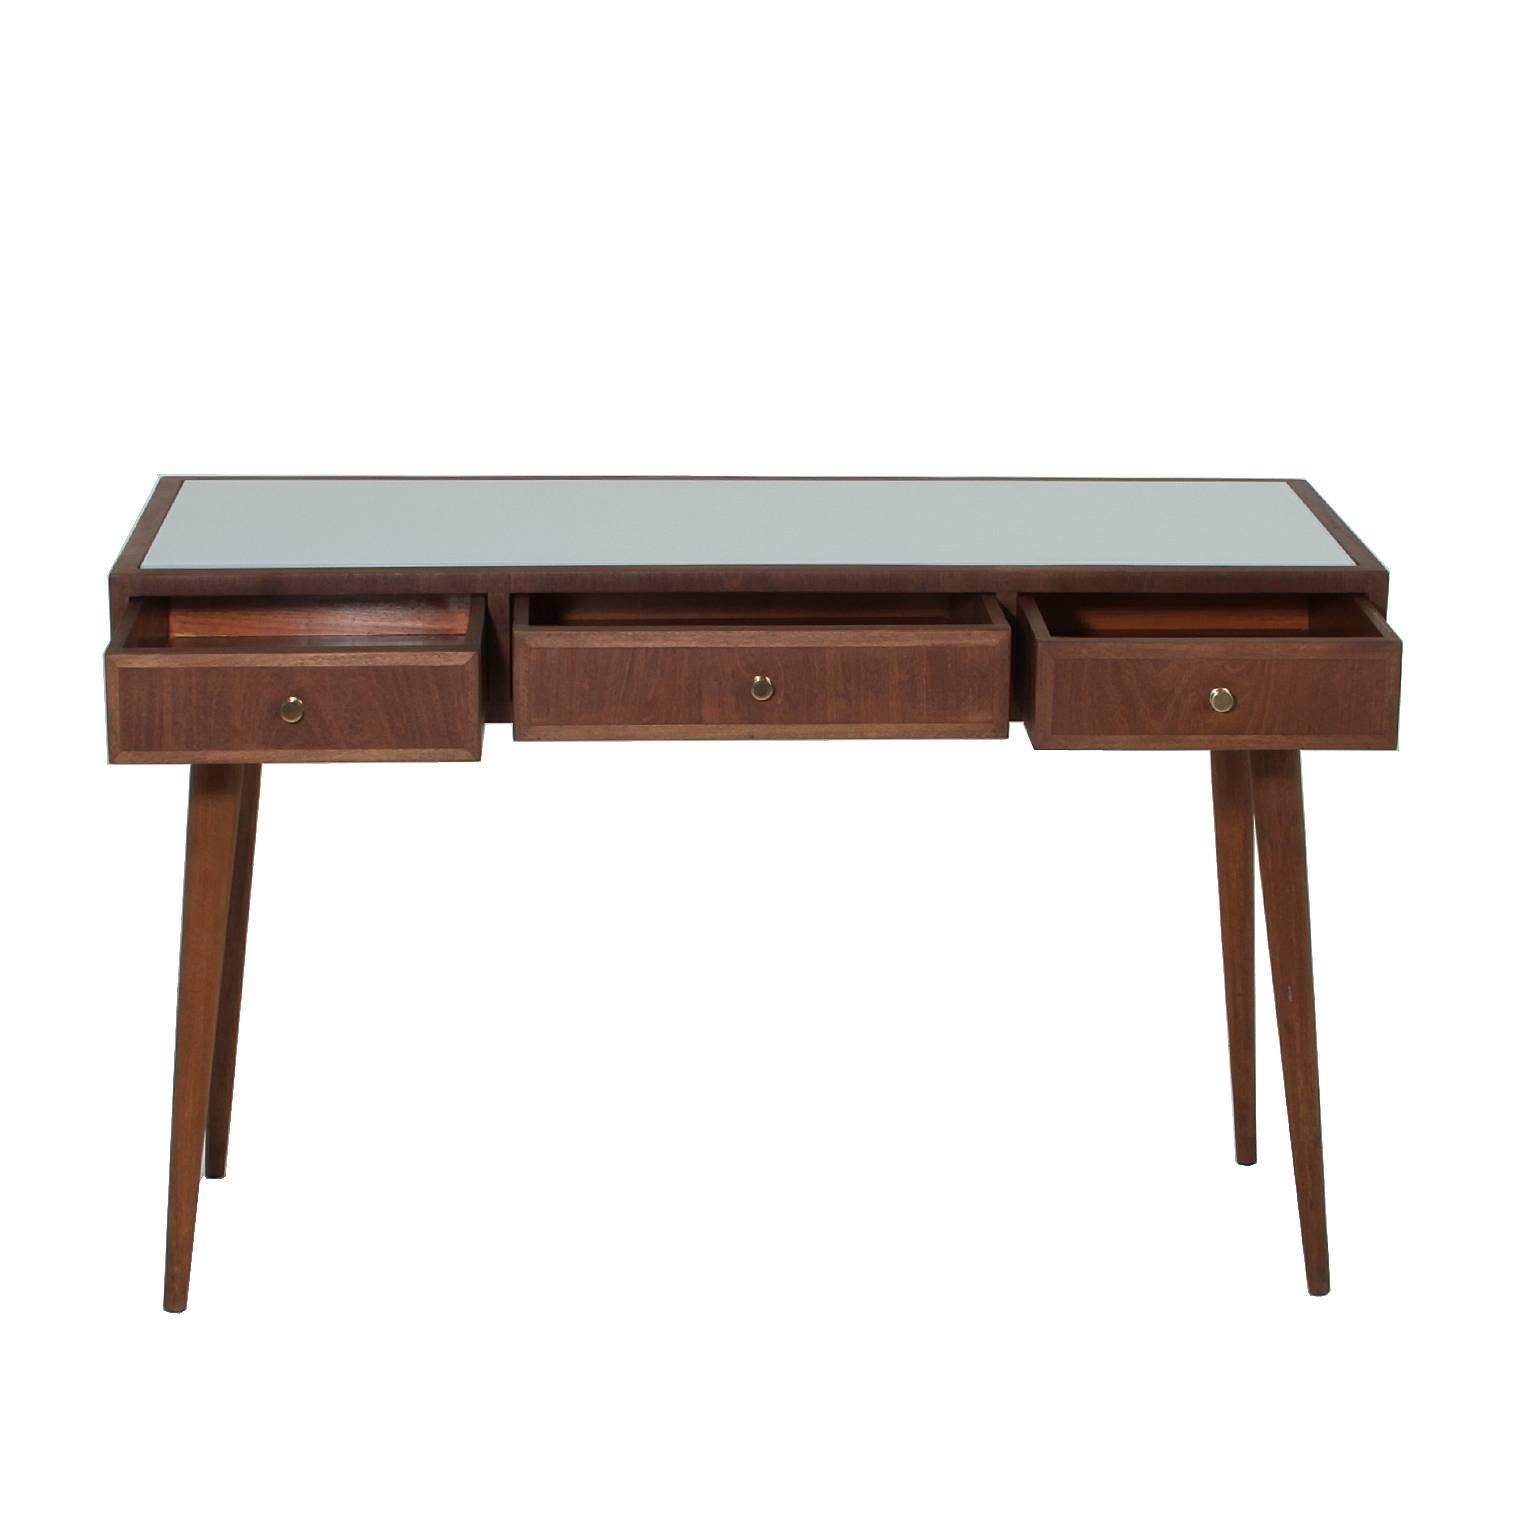 Mid-20th Century Giuseppe Scapinelli Three-Drawer Brazilian Hardwood Desk with White Glass Top For Sale